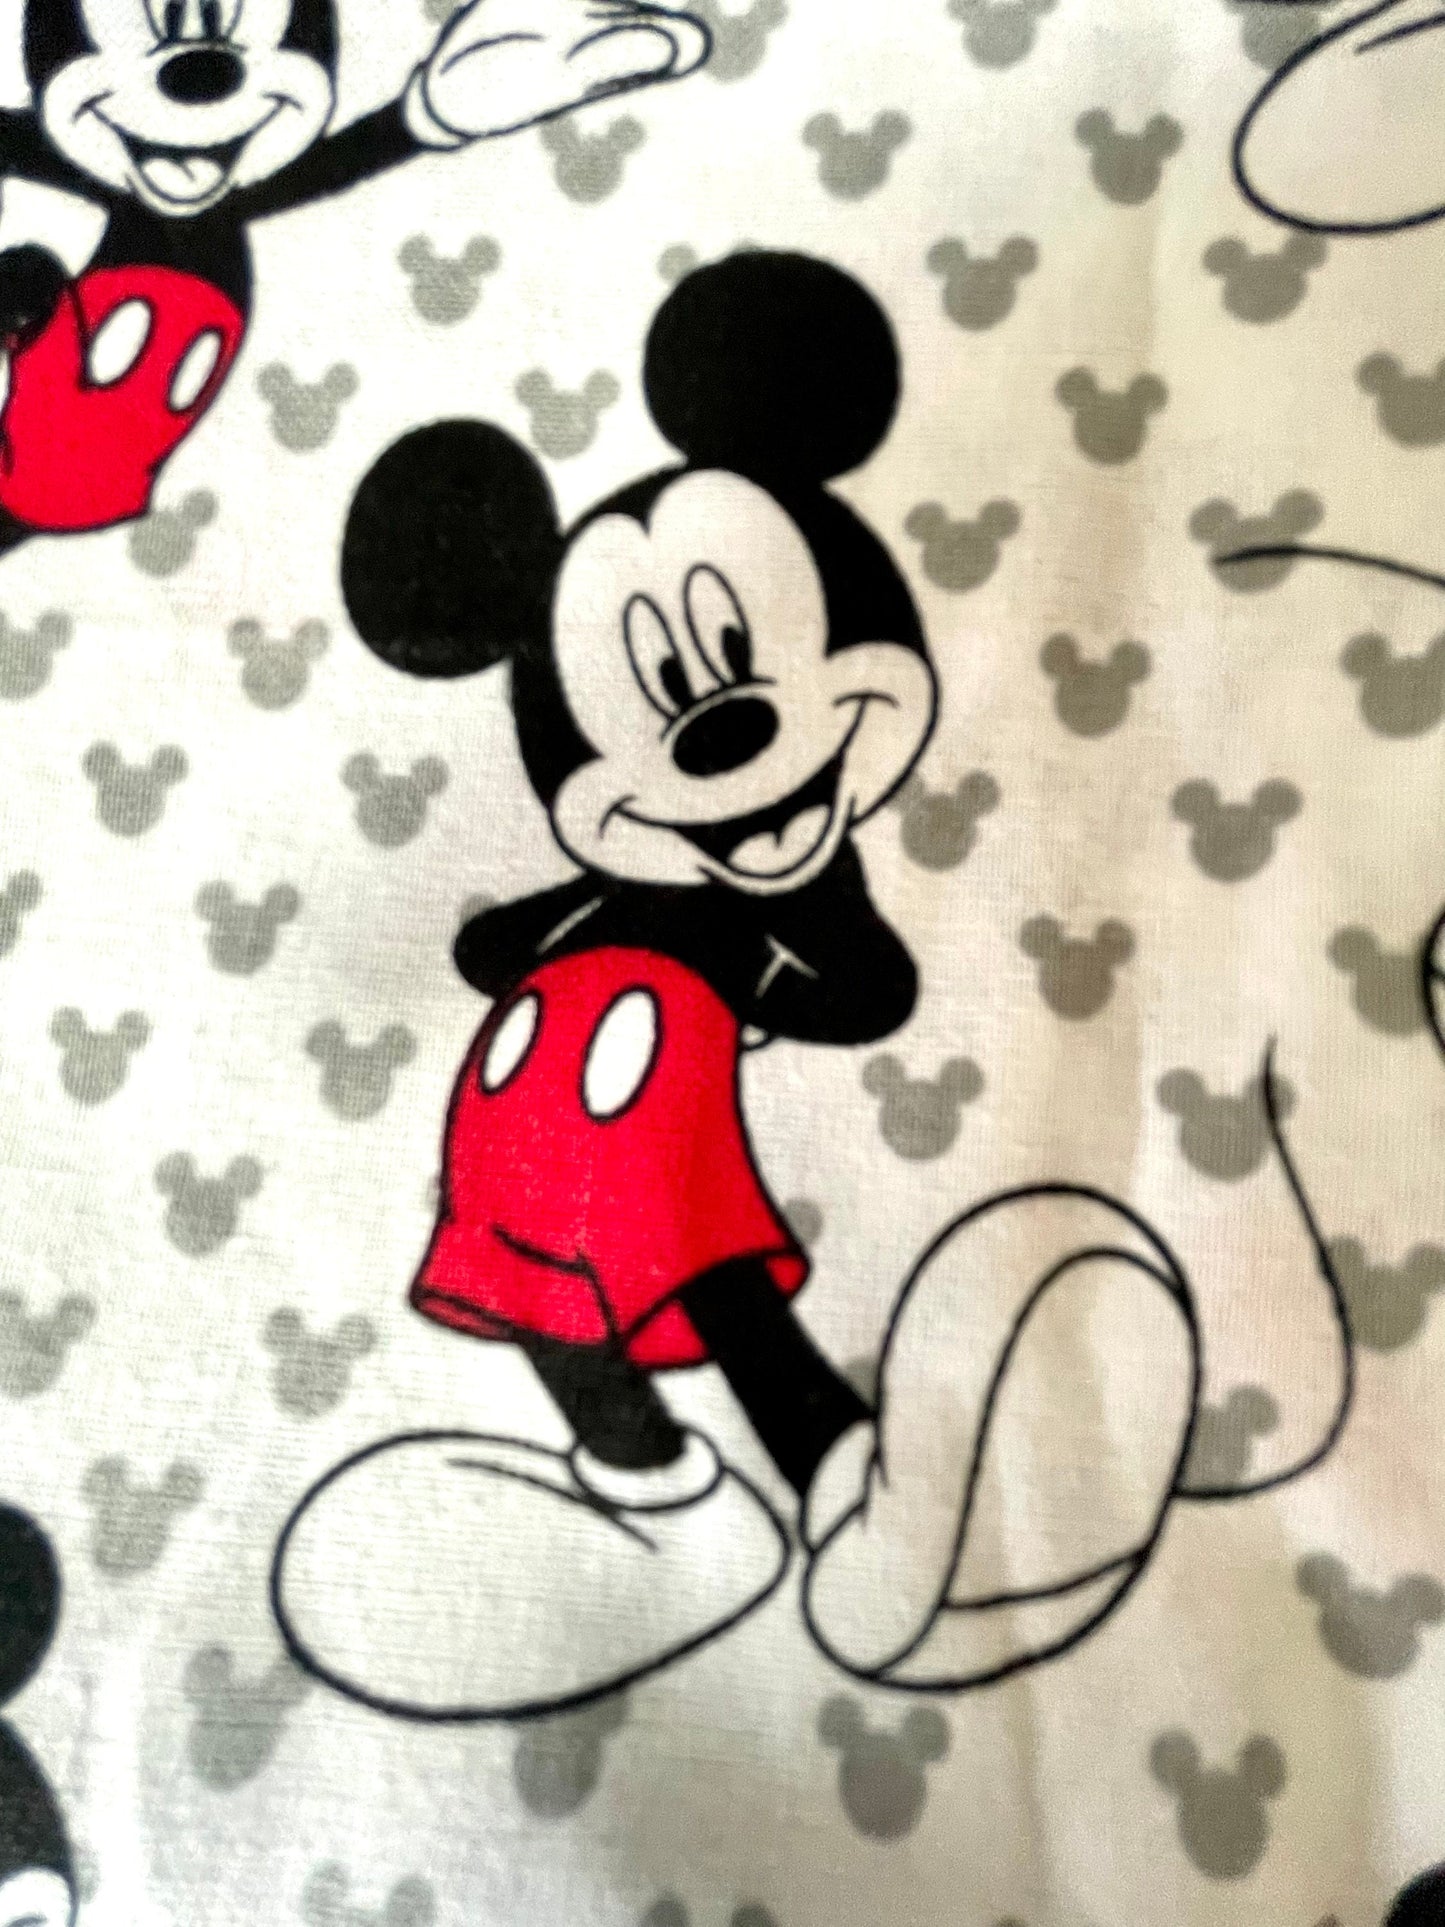 The most adorable Mickey Mouse blanket ever!